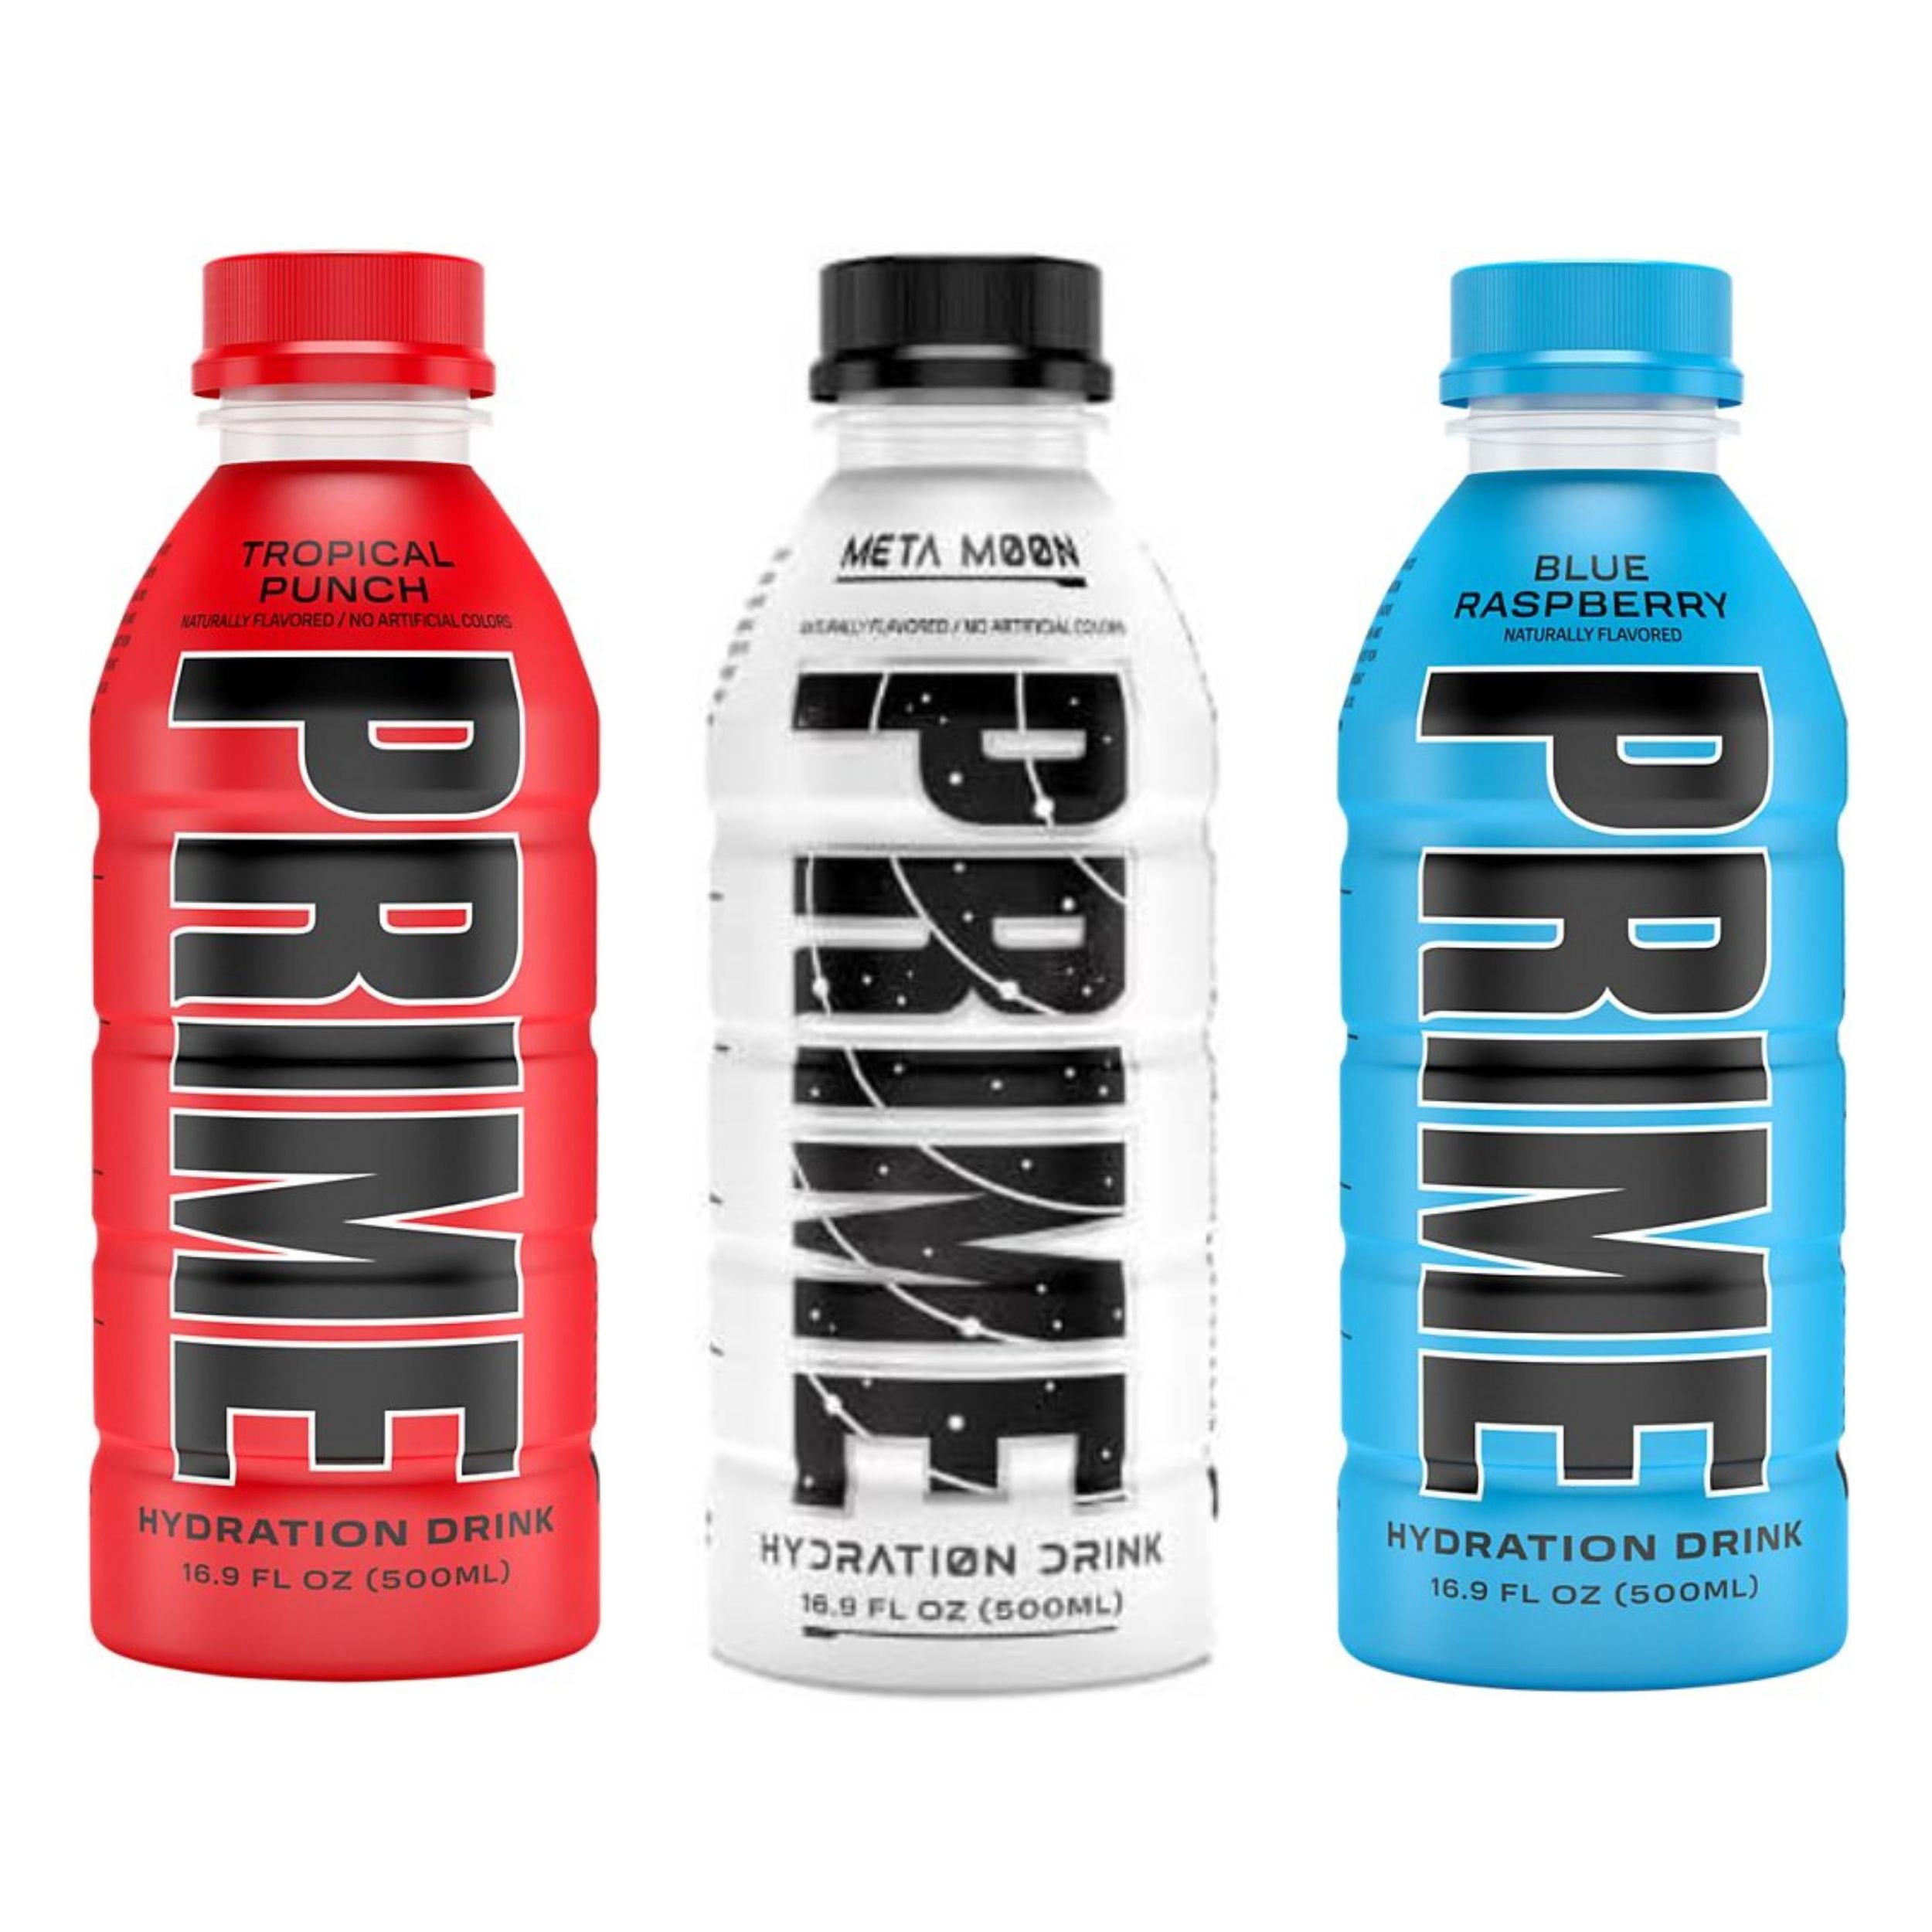 Prime Tropical Punch Hydration Drink Multipack, 12 x 500 ml